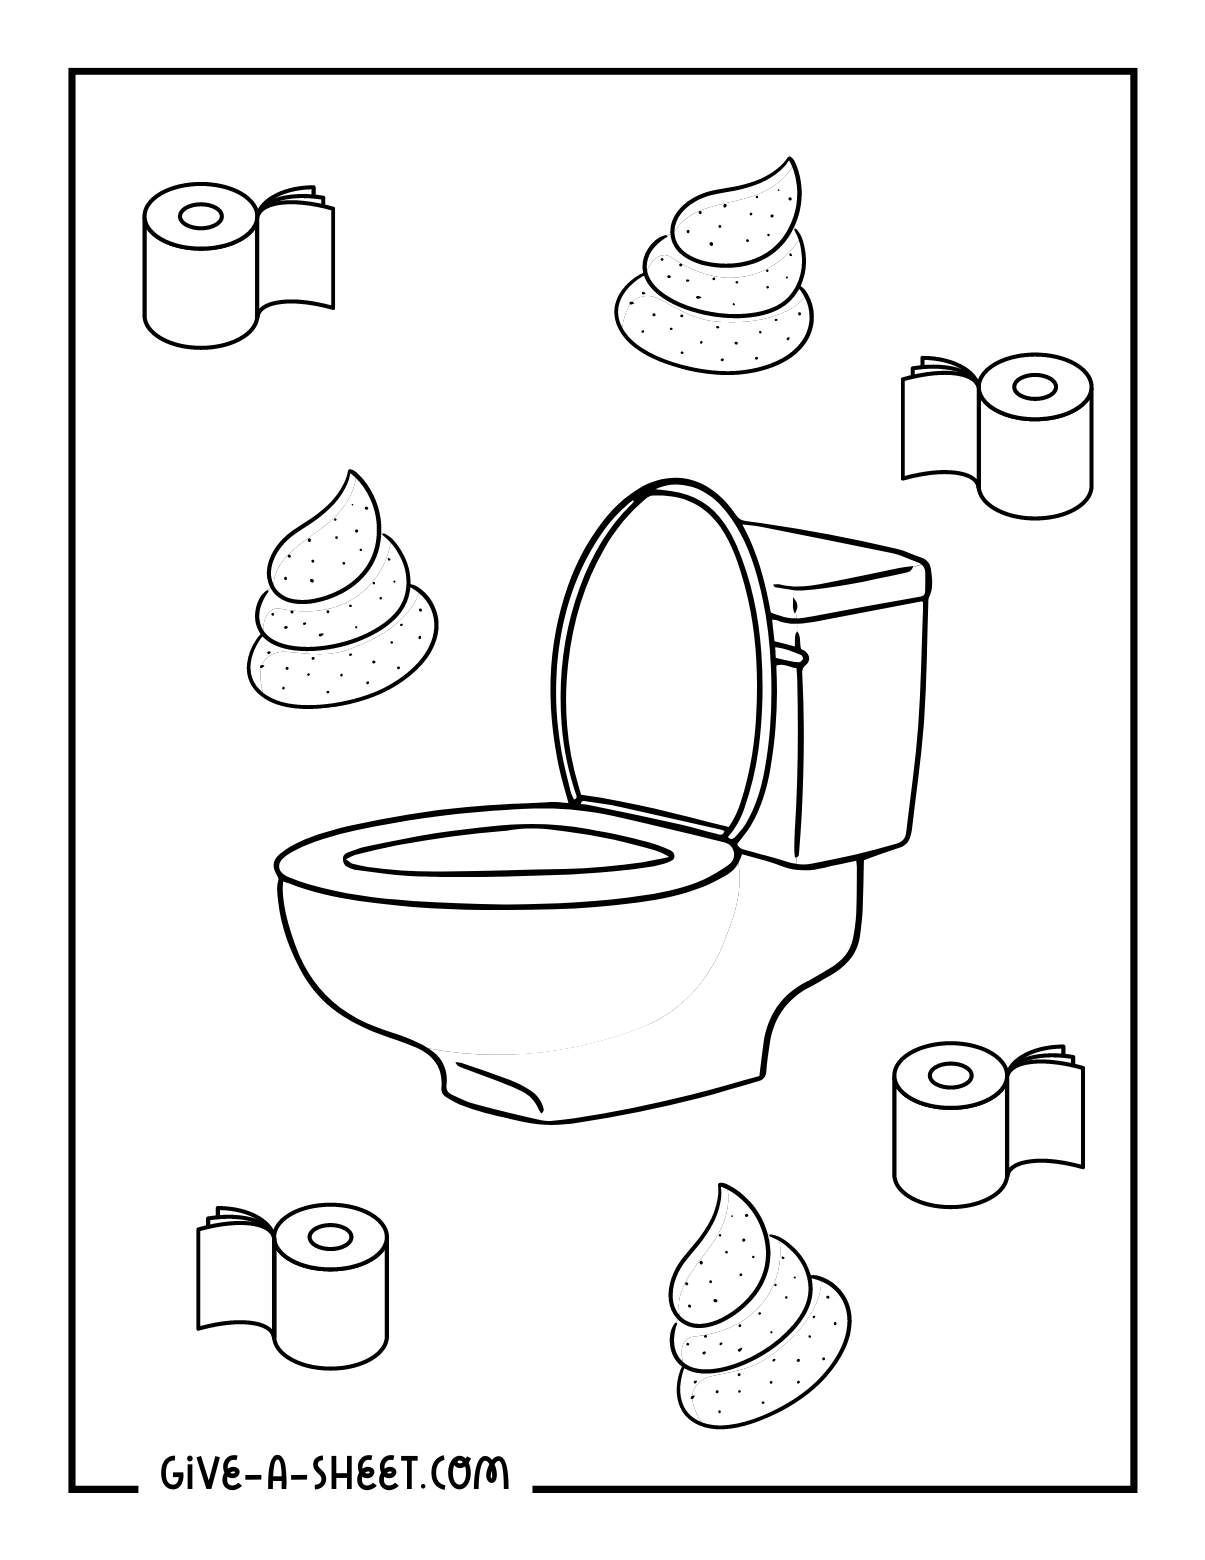 Potty training toilet coloring page for kids.